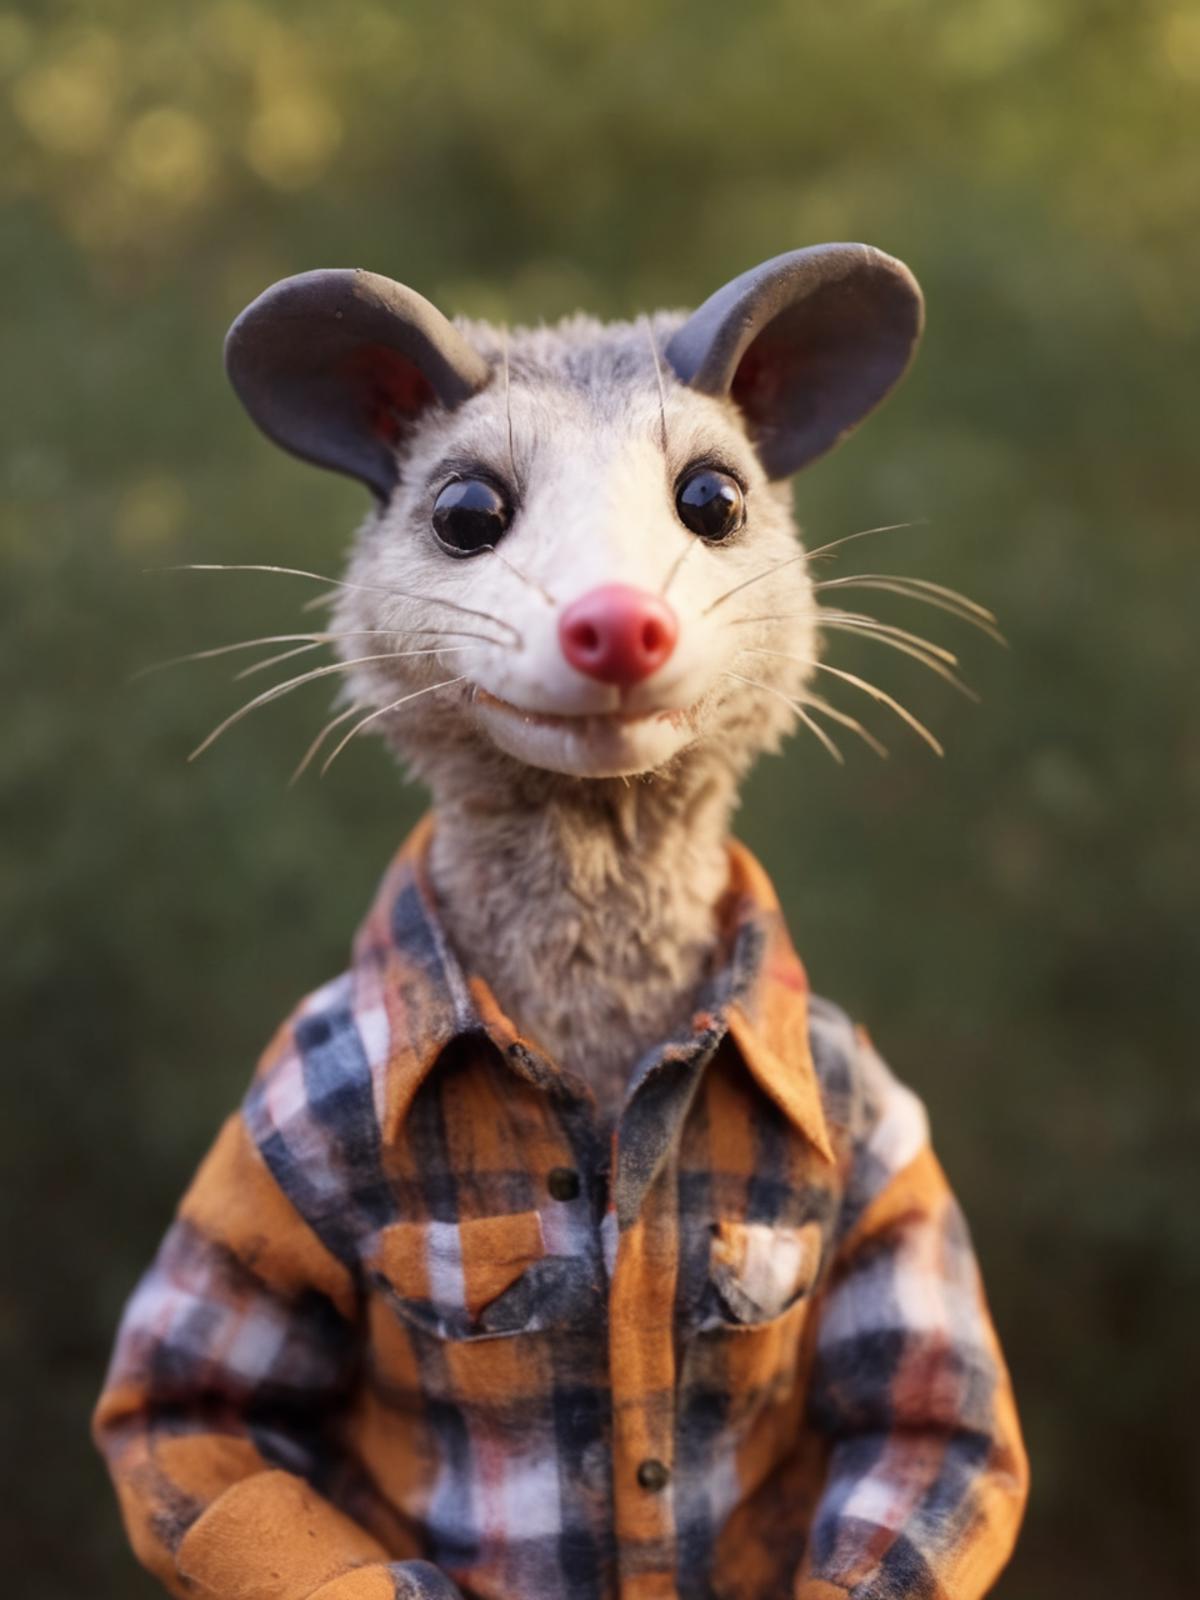 Better Opossums image by ziaai